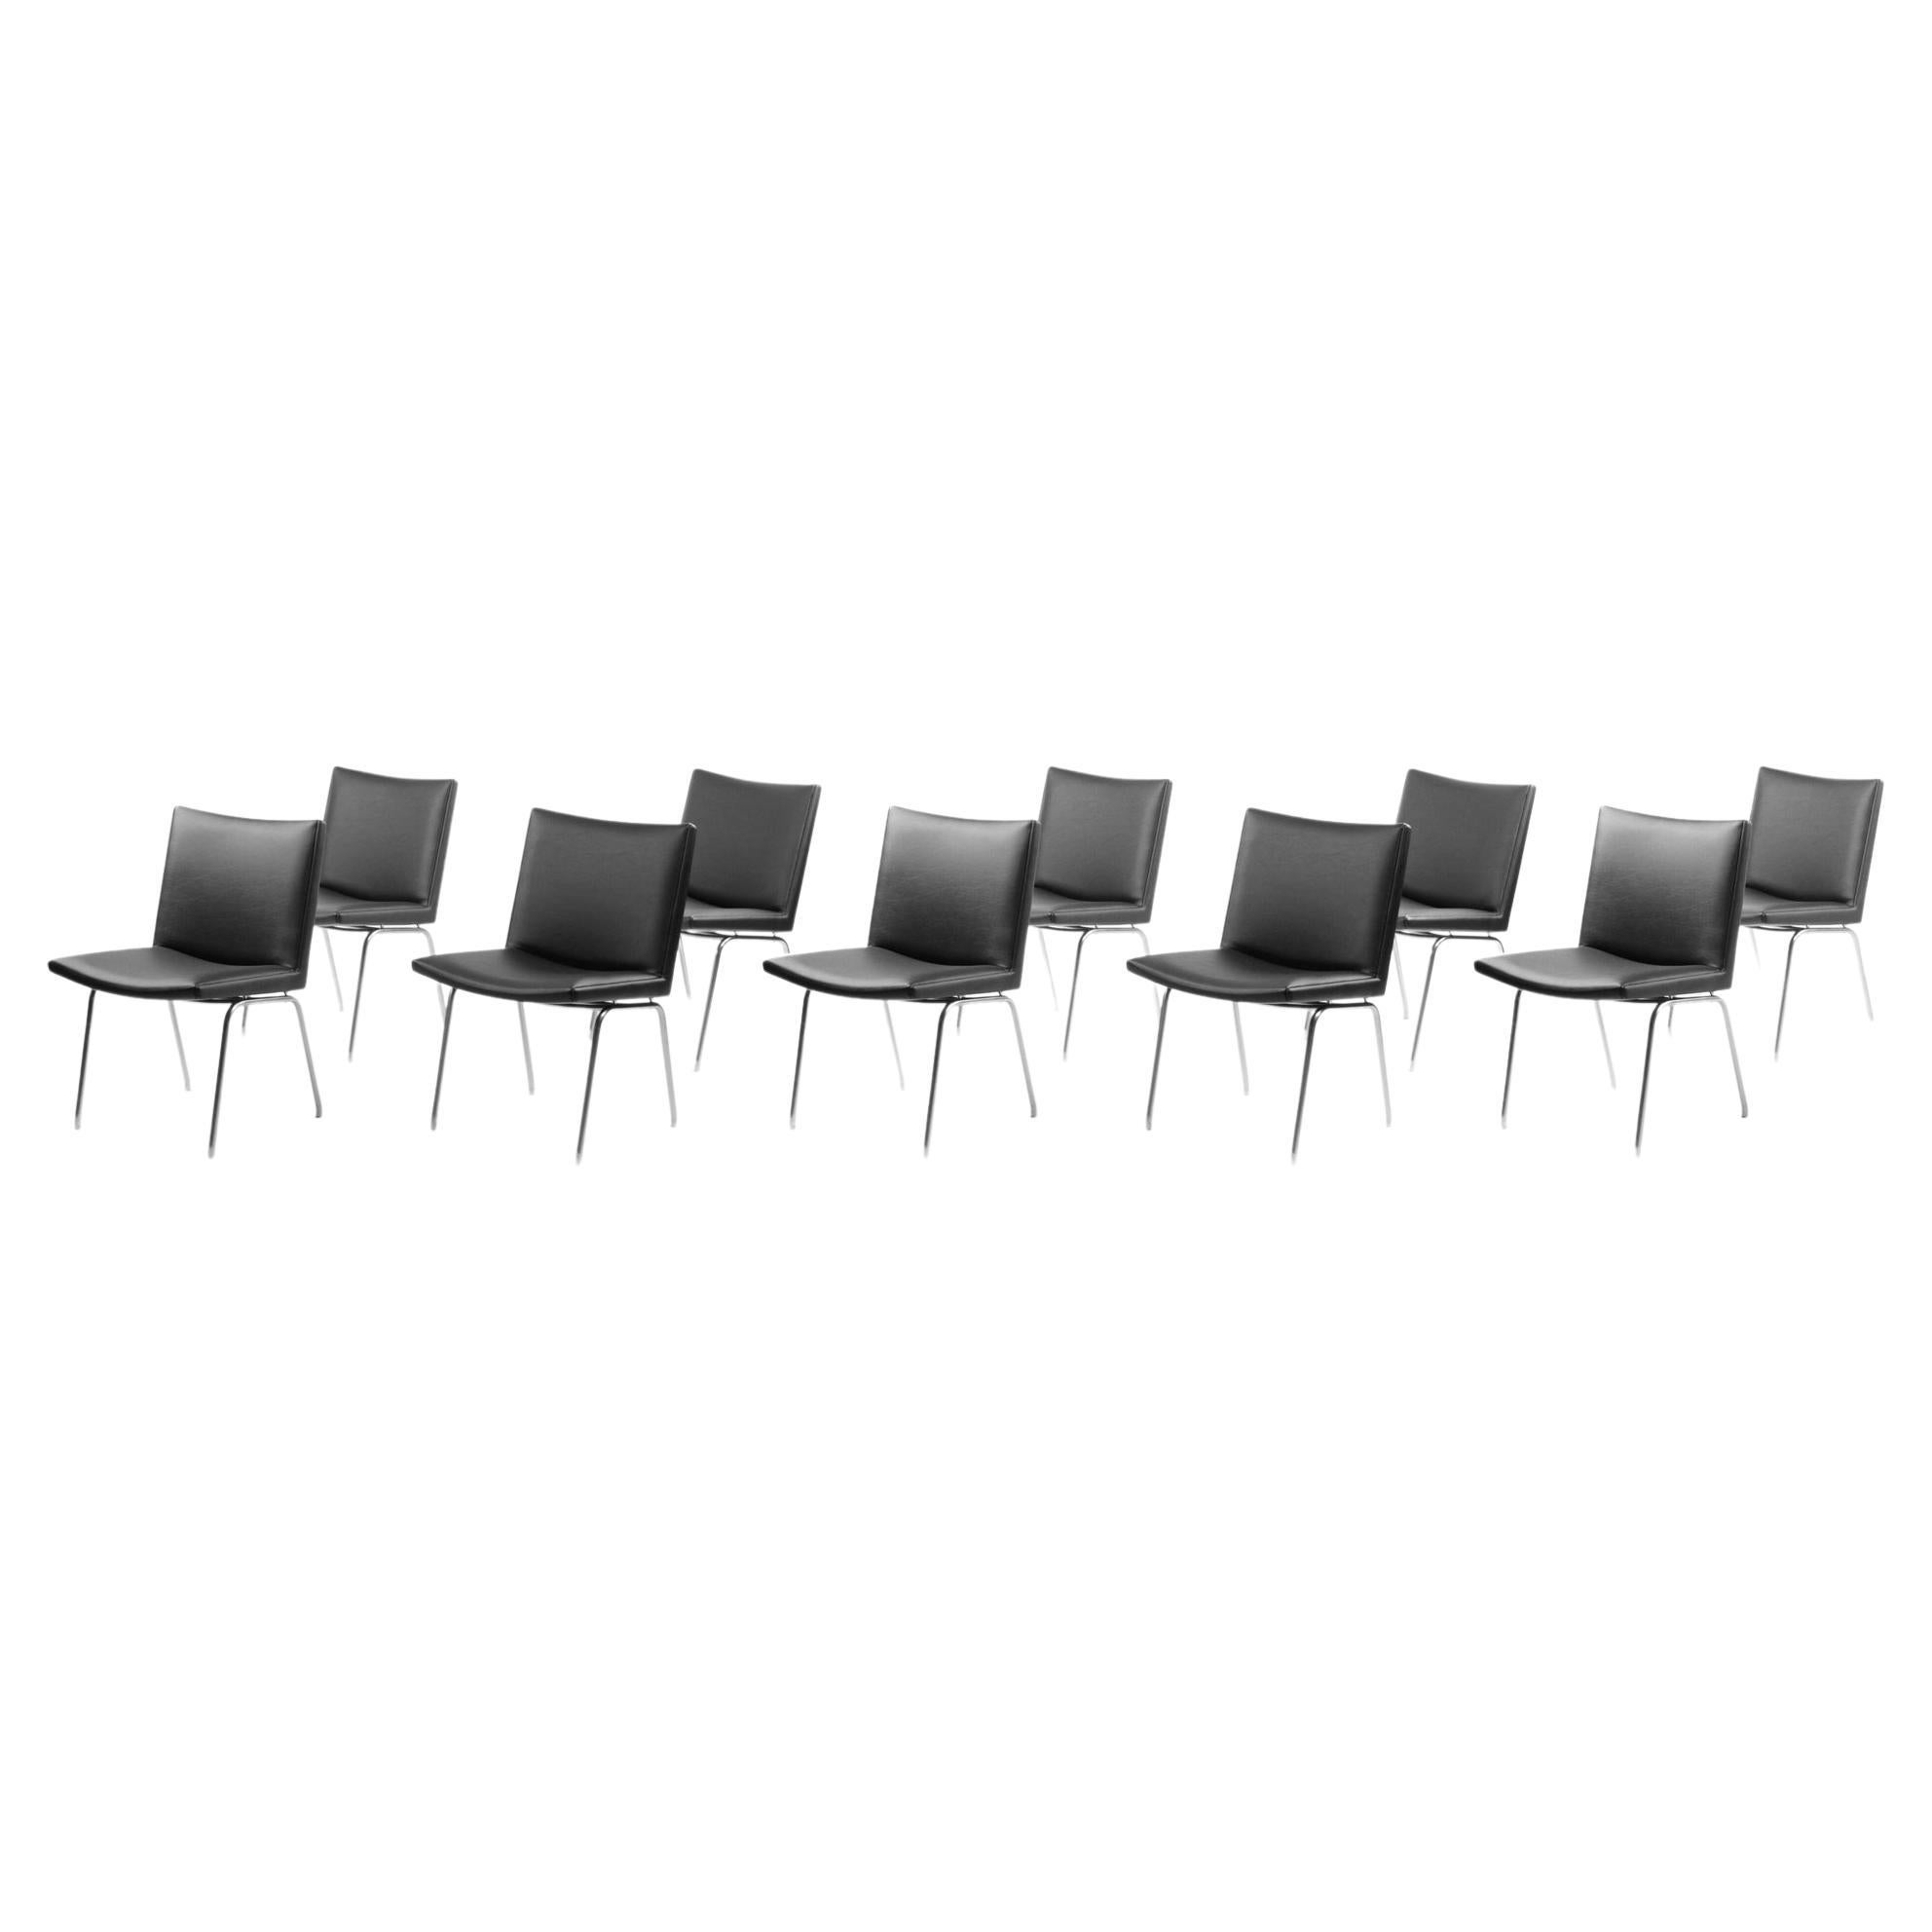 1960s Hans J. Wegner Set of 10 AP38 Airport Dining Chairs by A.P. Stolen Denmark